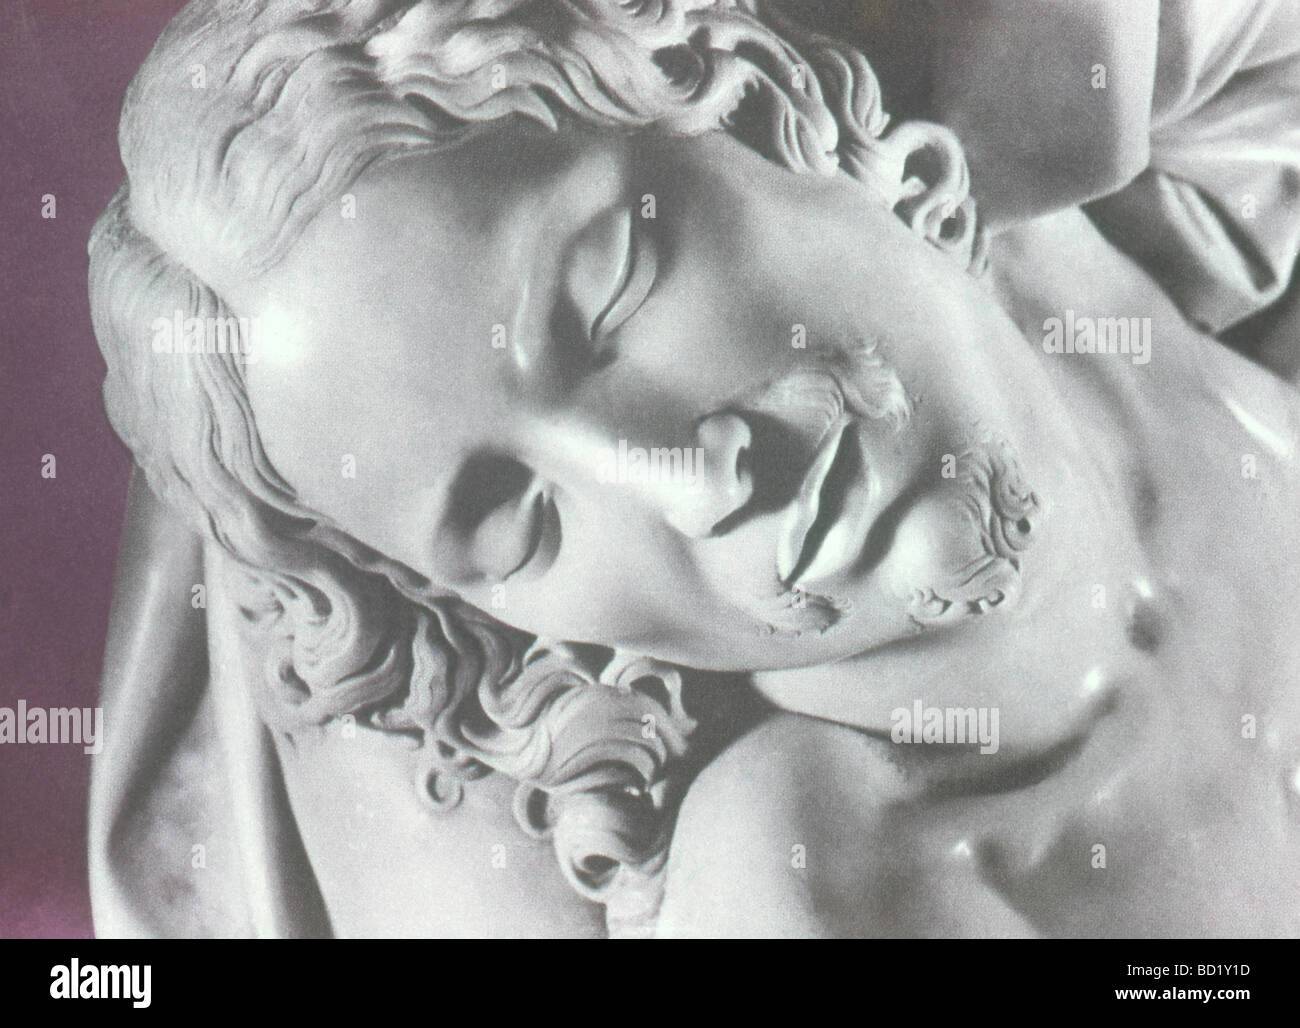 This section of the sculpture by Michelangel titled Pieta shows a close up of the face Jesus Christ. Stock Photo